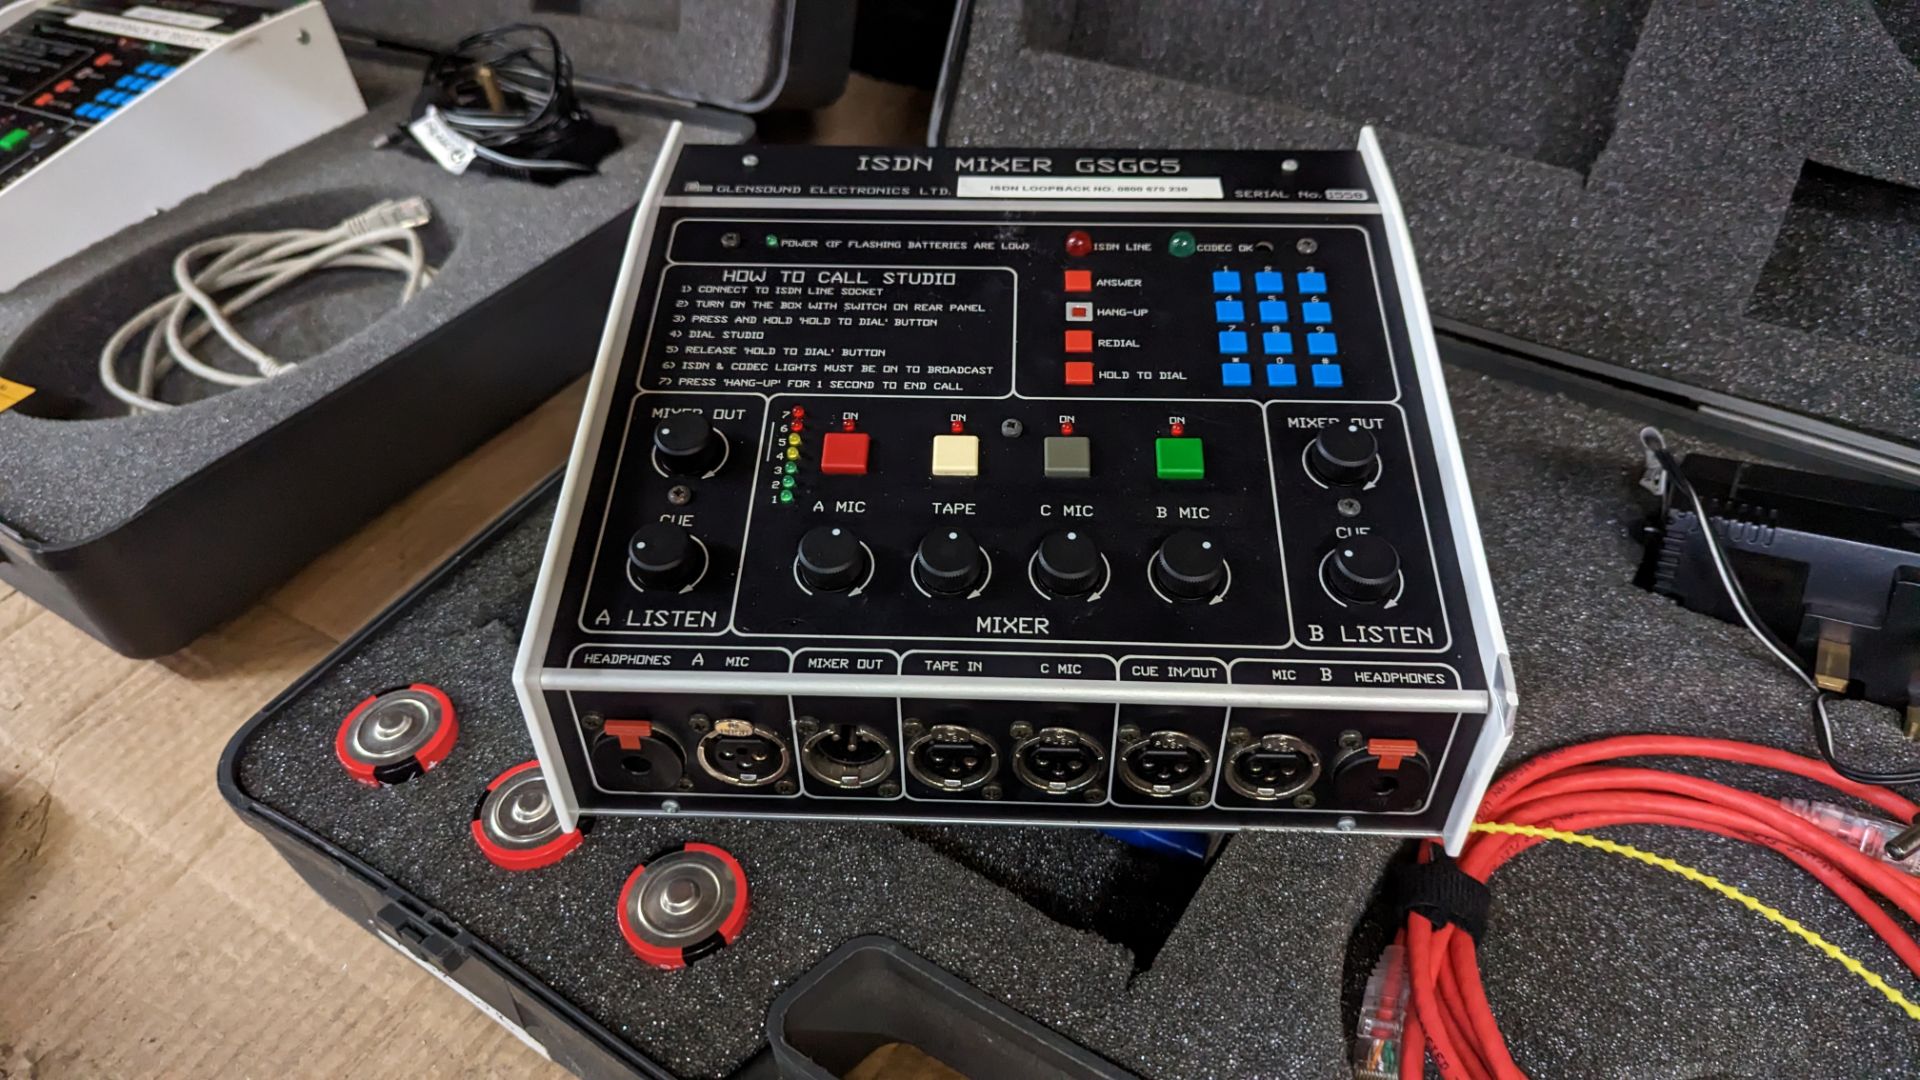 Glensound ISDN mixer, model GSGC5. Includes carry case and ancillaries - Image 7 of 9